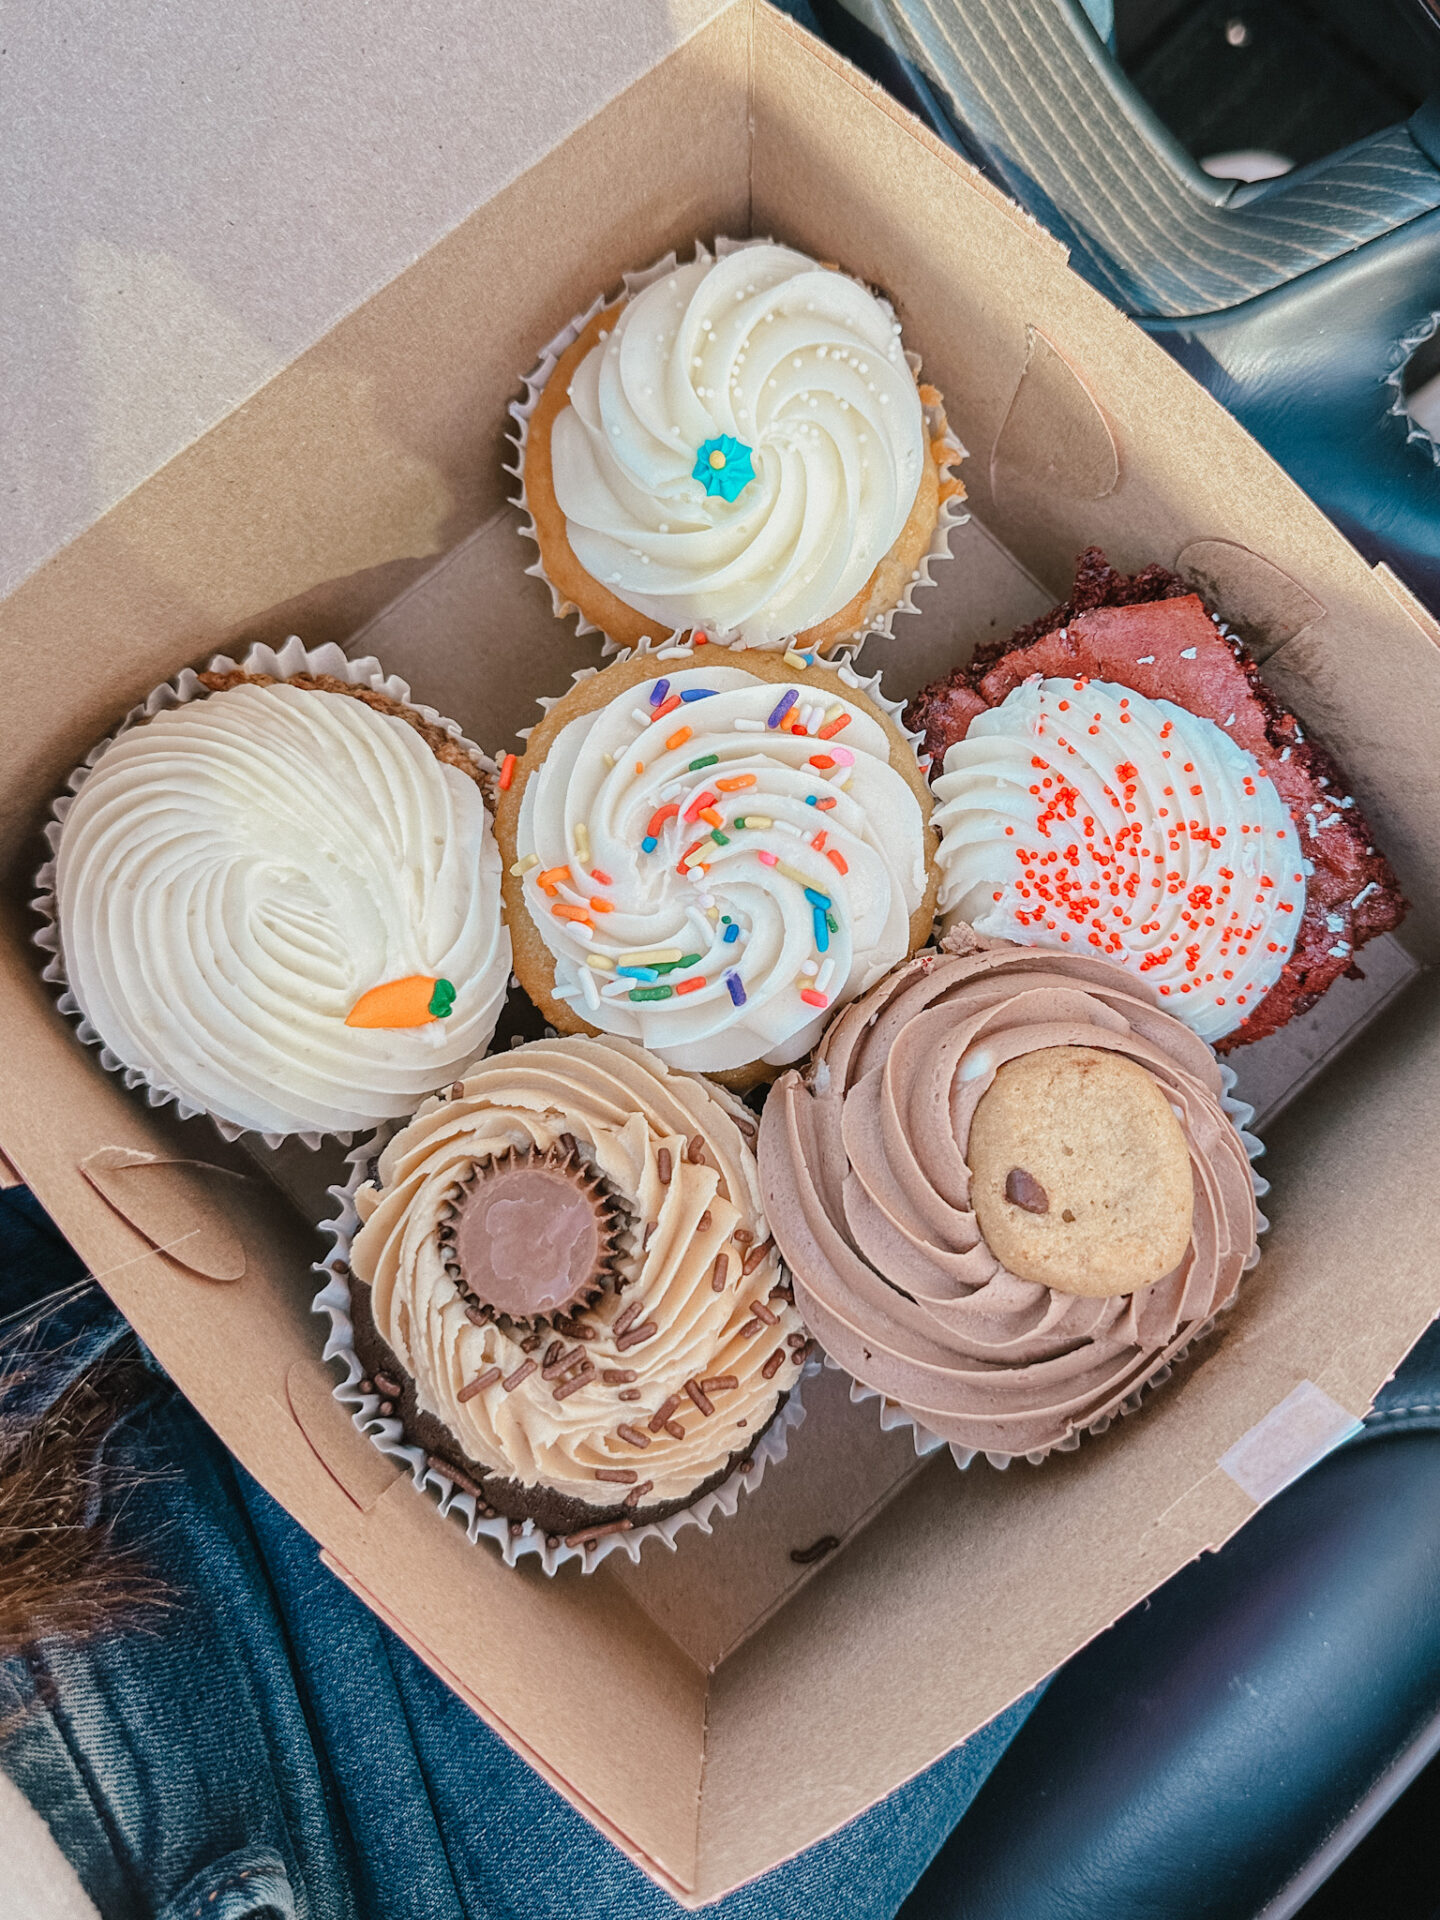 The Flying Cupcake in downtown Indianapolis, IN by travel blogger Angela Lanter